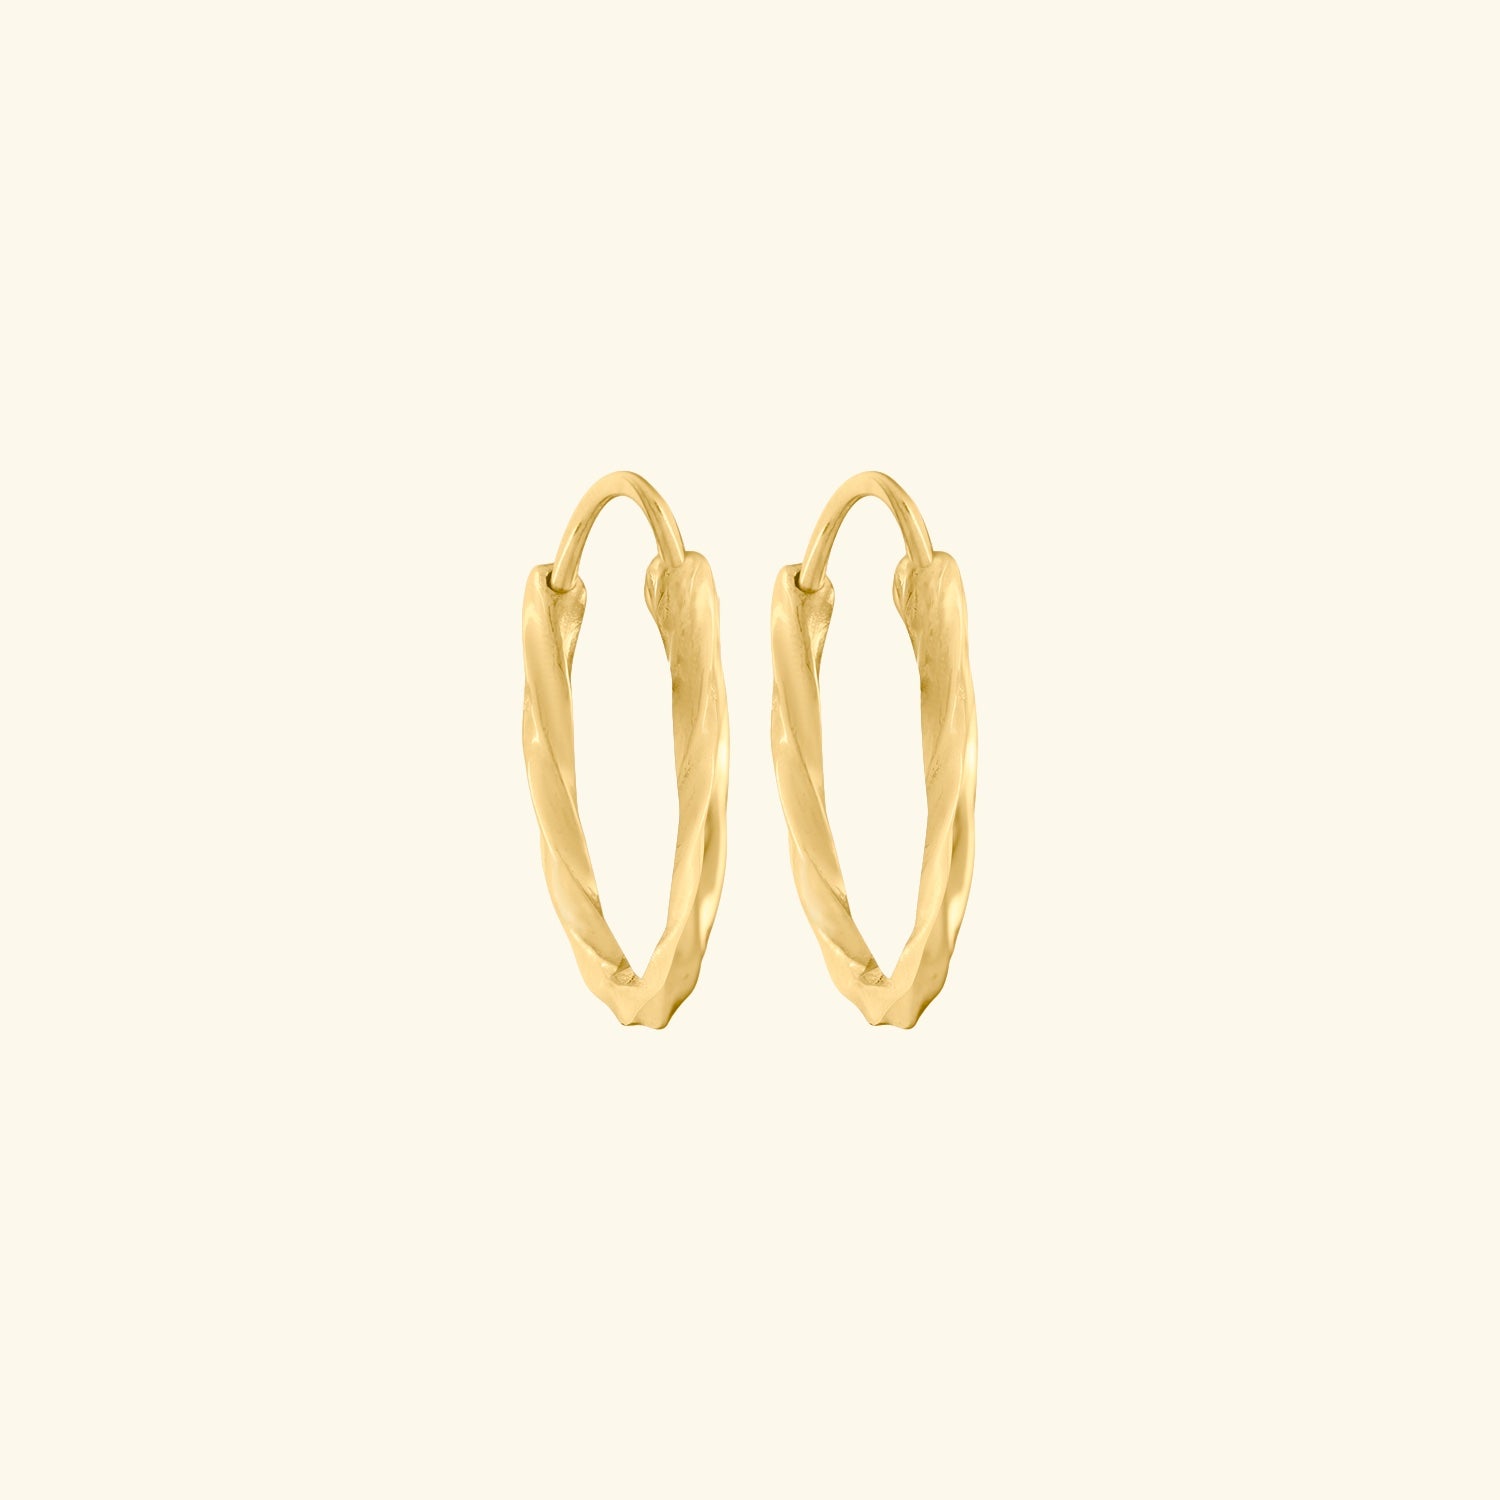 Sally Large Twisted Hoops (18mm)